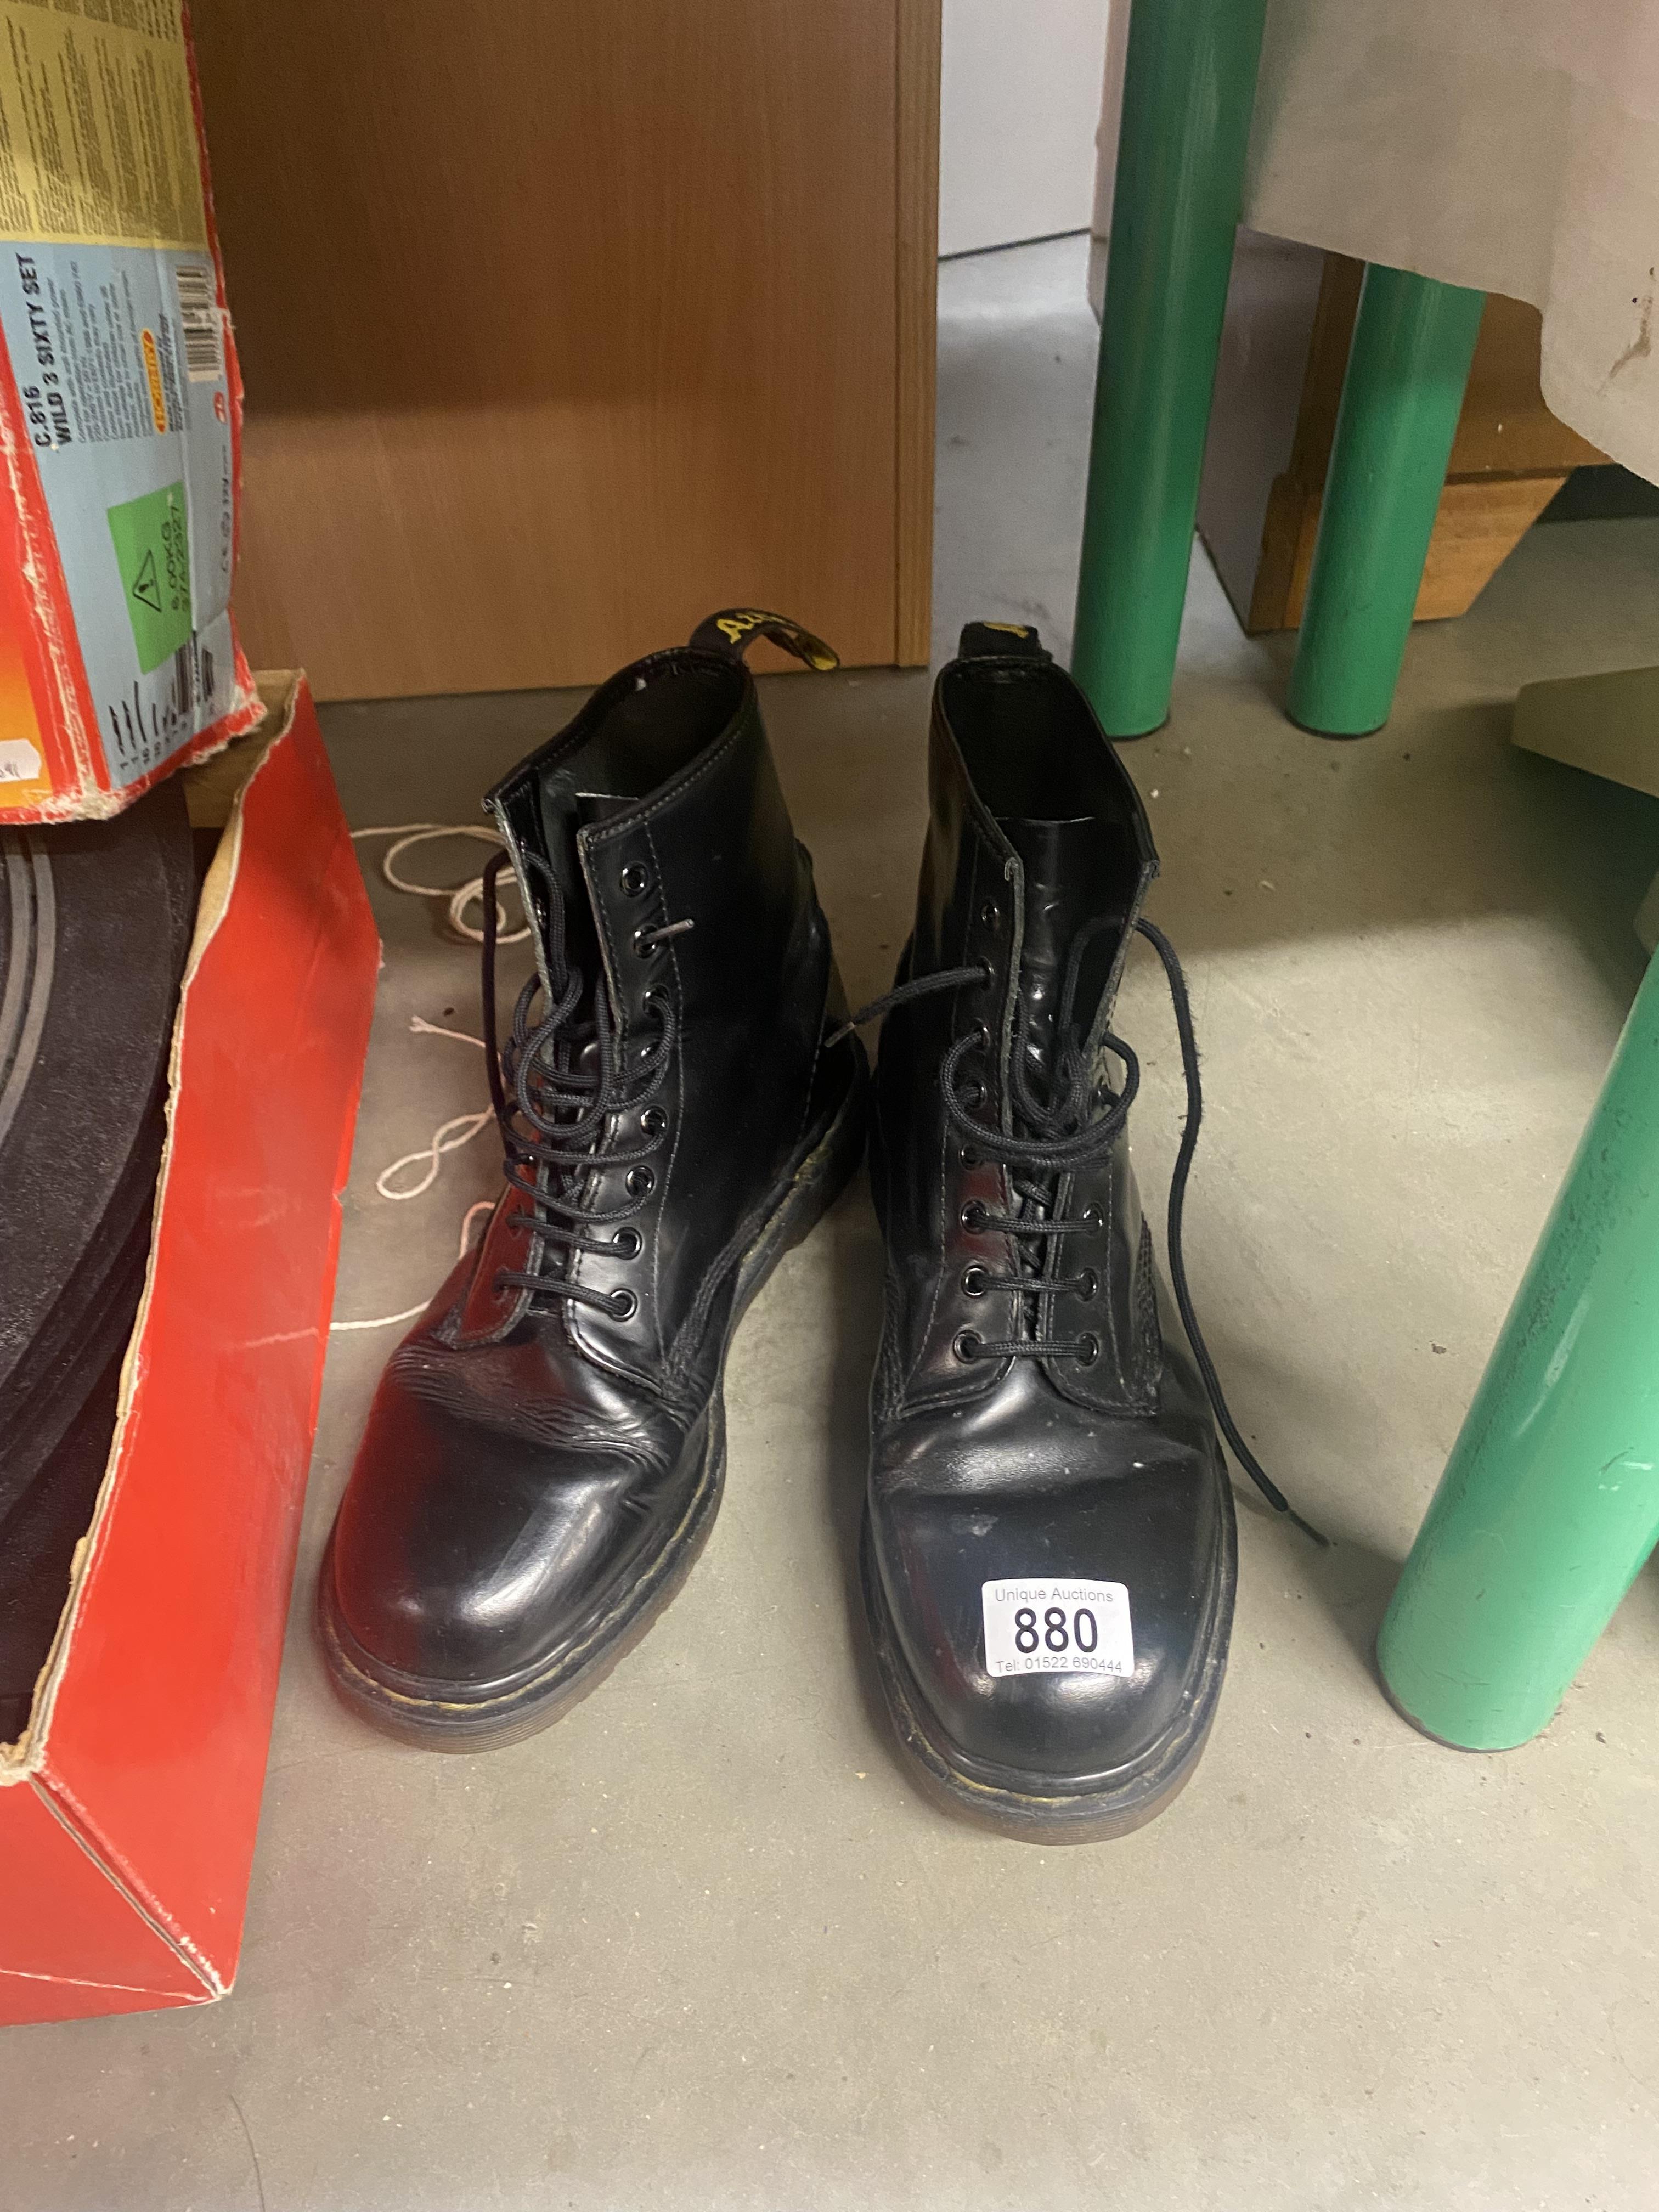 A pair of used 8 hole Dr Martin boots approximate size 9